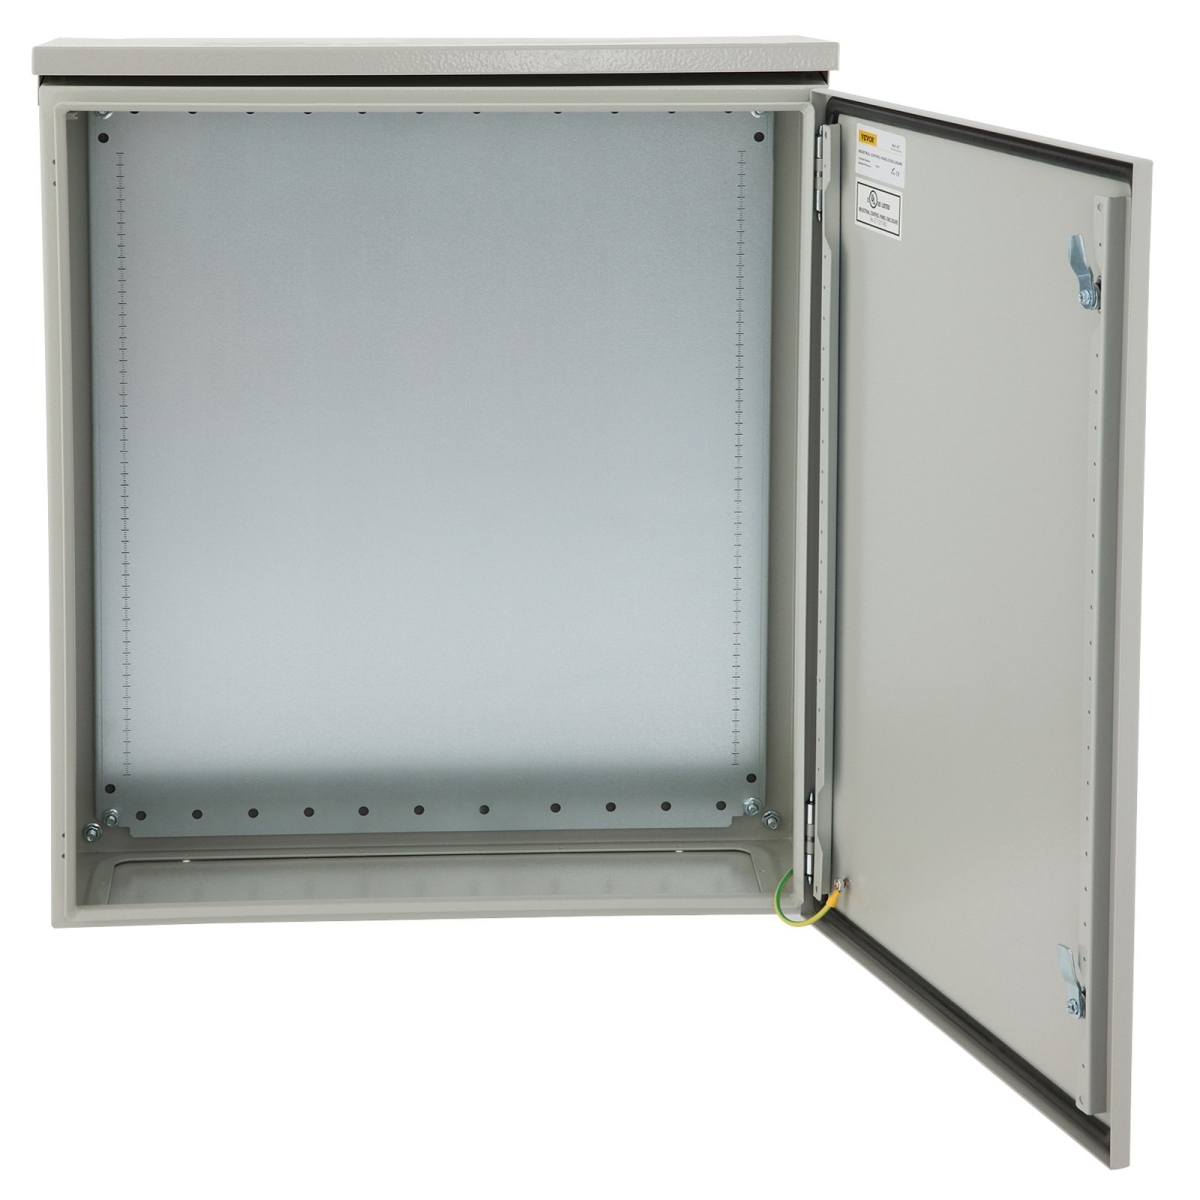 Picture of Vevor TUL60X60X30CMB2JPV0 24 x 24 x 12 in. UL Certified NEMA 4 Outdoor Electrical Enclosure for Outdoor Indoor Use with Rain Hood